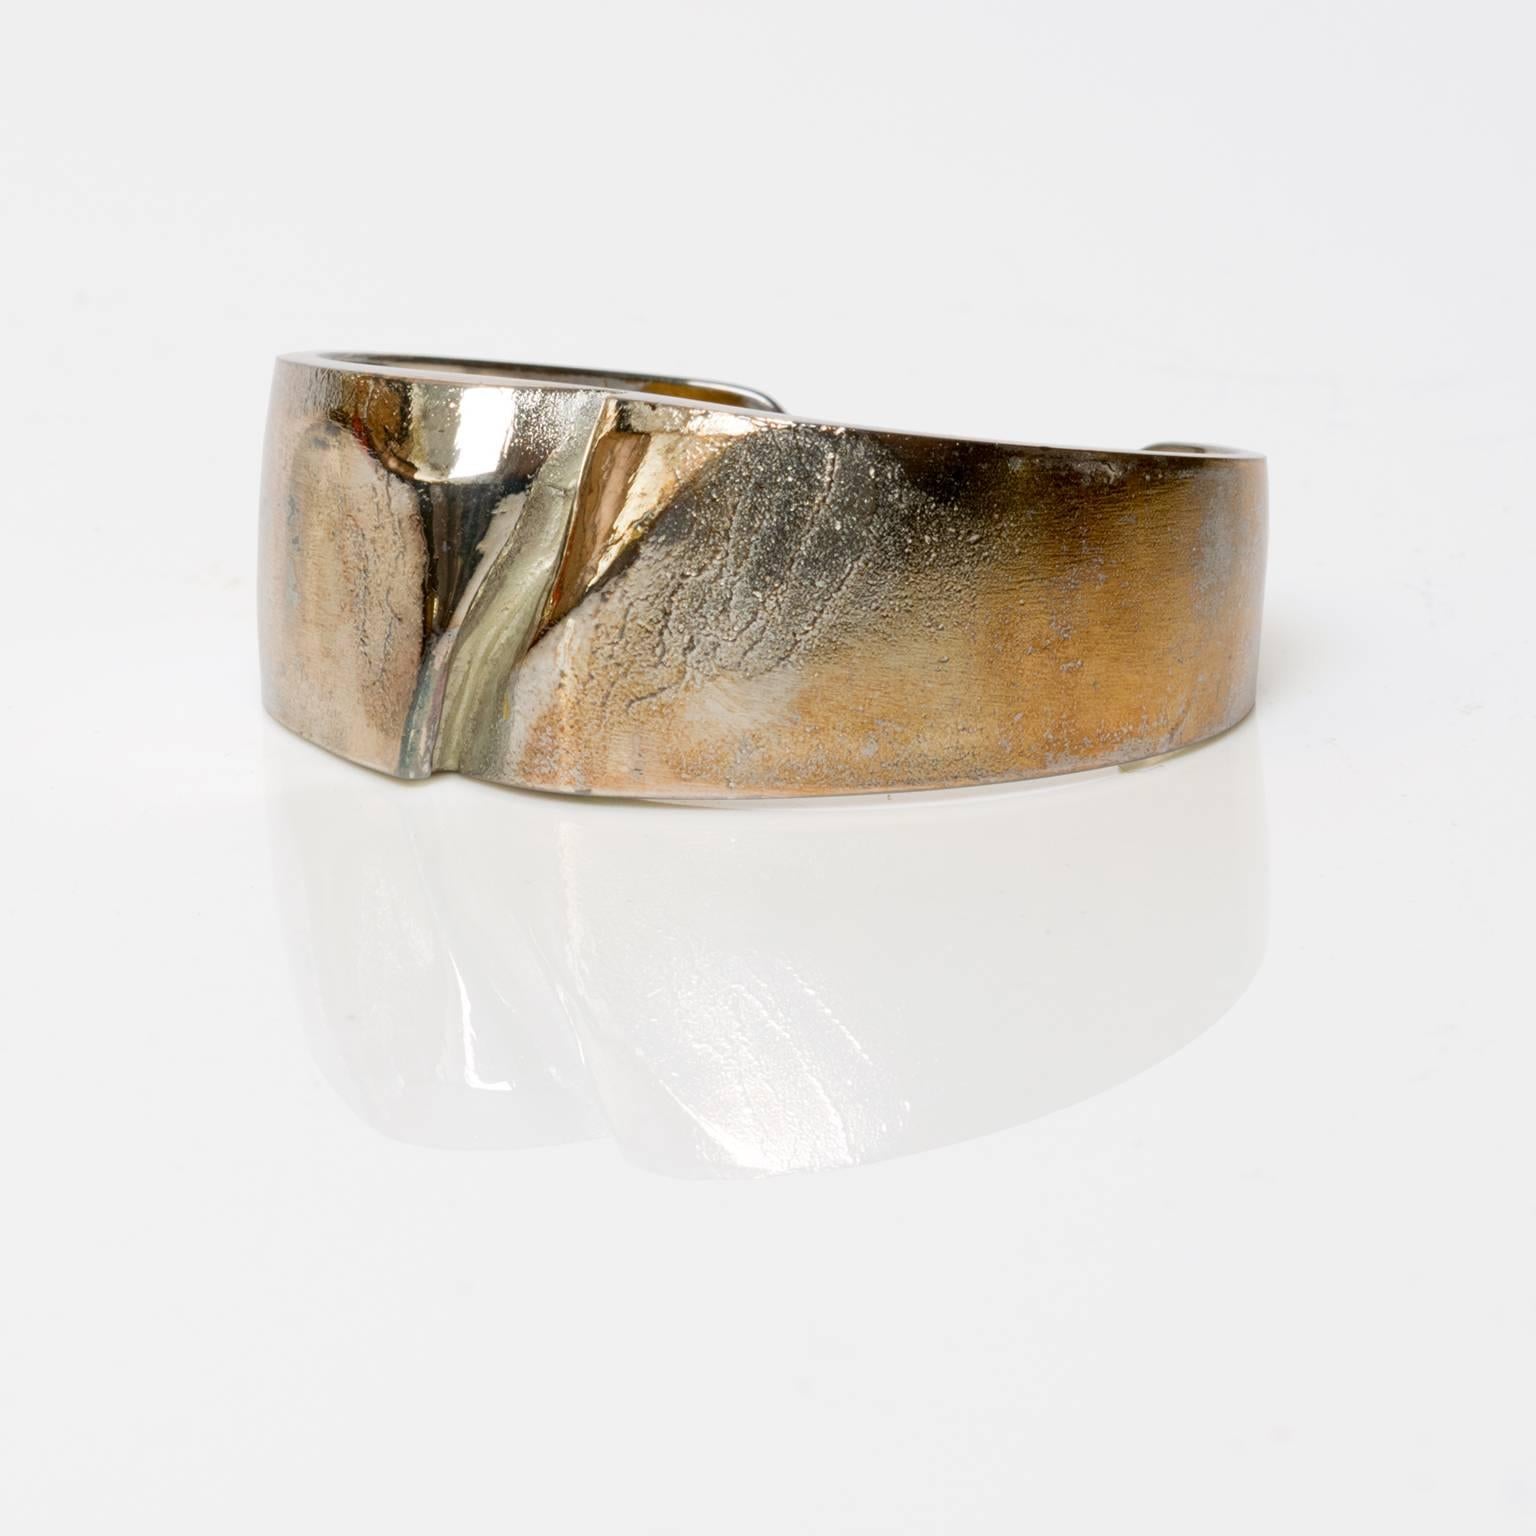 A Scandinavian Modern Finish silver bracelet in silver by Bjorn Weckstrom for Lapponia, 1971. Weckstrom's work is famous for his unique patination treatments and surface textures.
Measures: Width 2.5".
Depth 2".
Height 1".